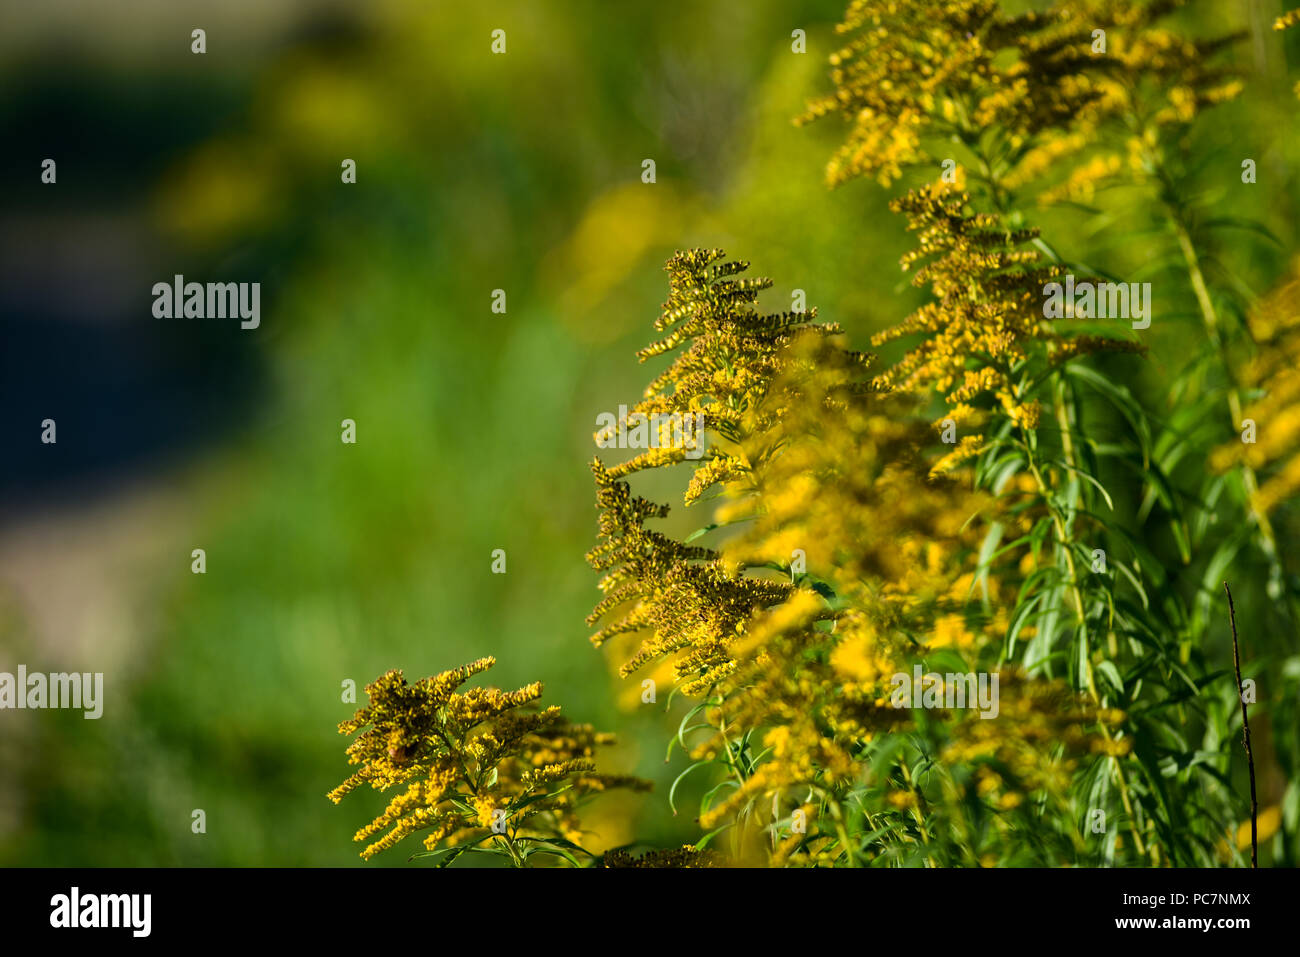 Solidago blooming on the summer field. Stock Photo